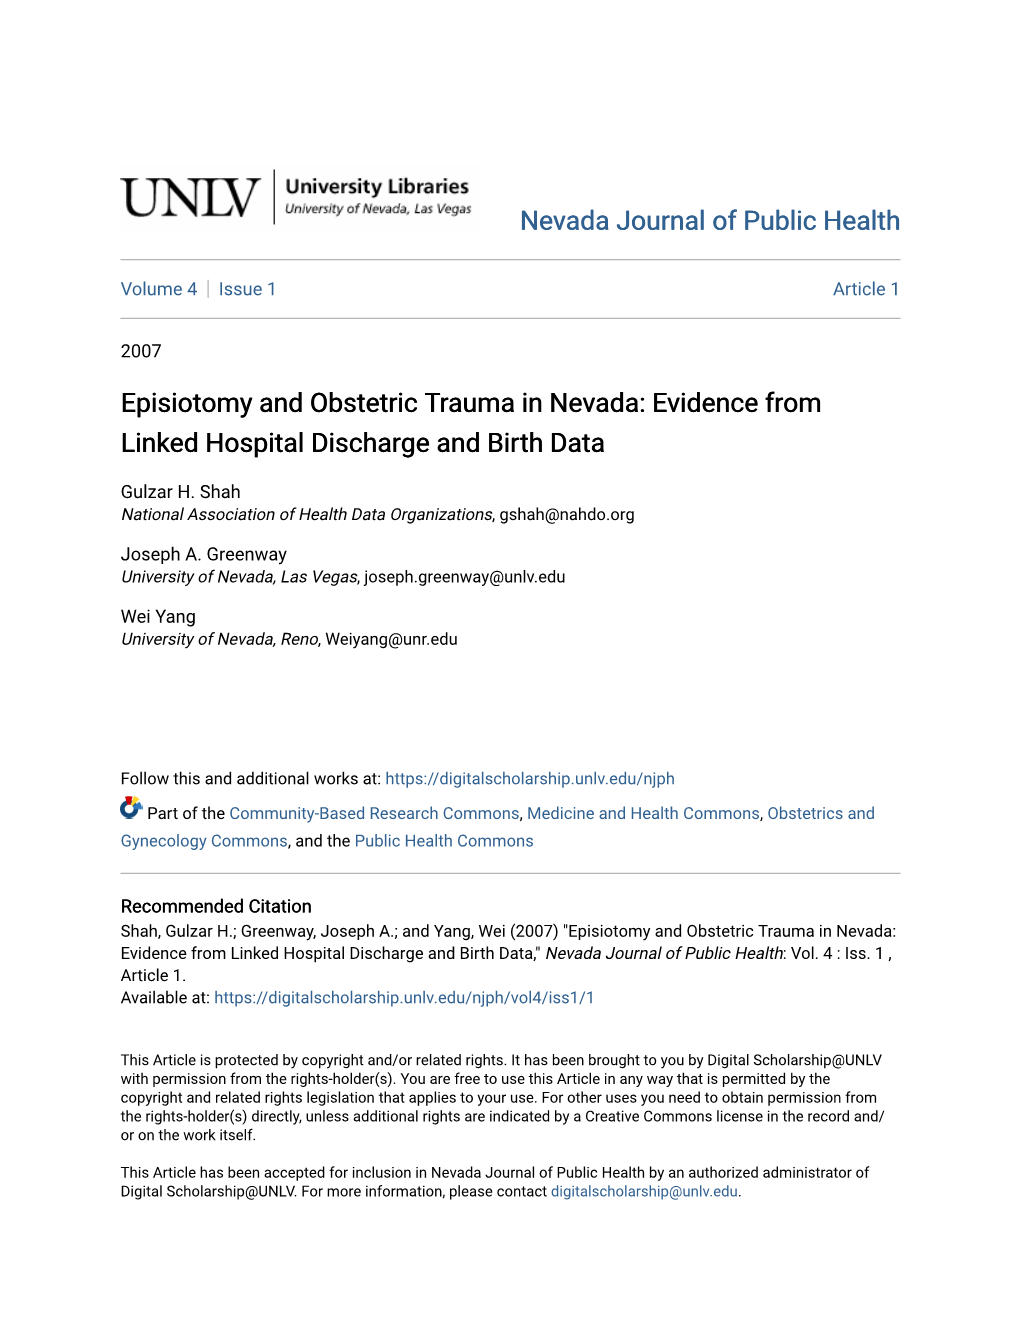 Episiotomy and Obstetric Trauma in Nevada: Evidence from Linked Hospital Discharge and Birth Data